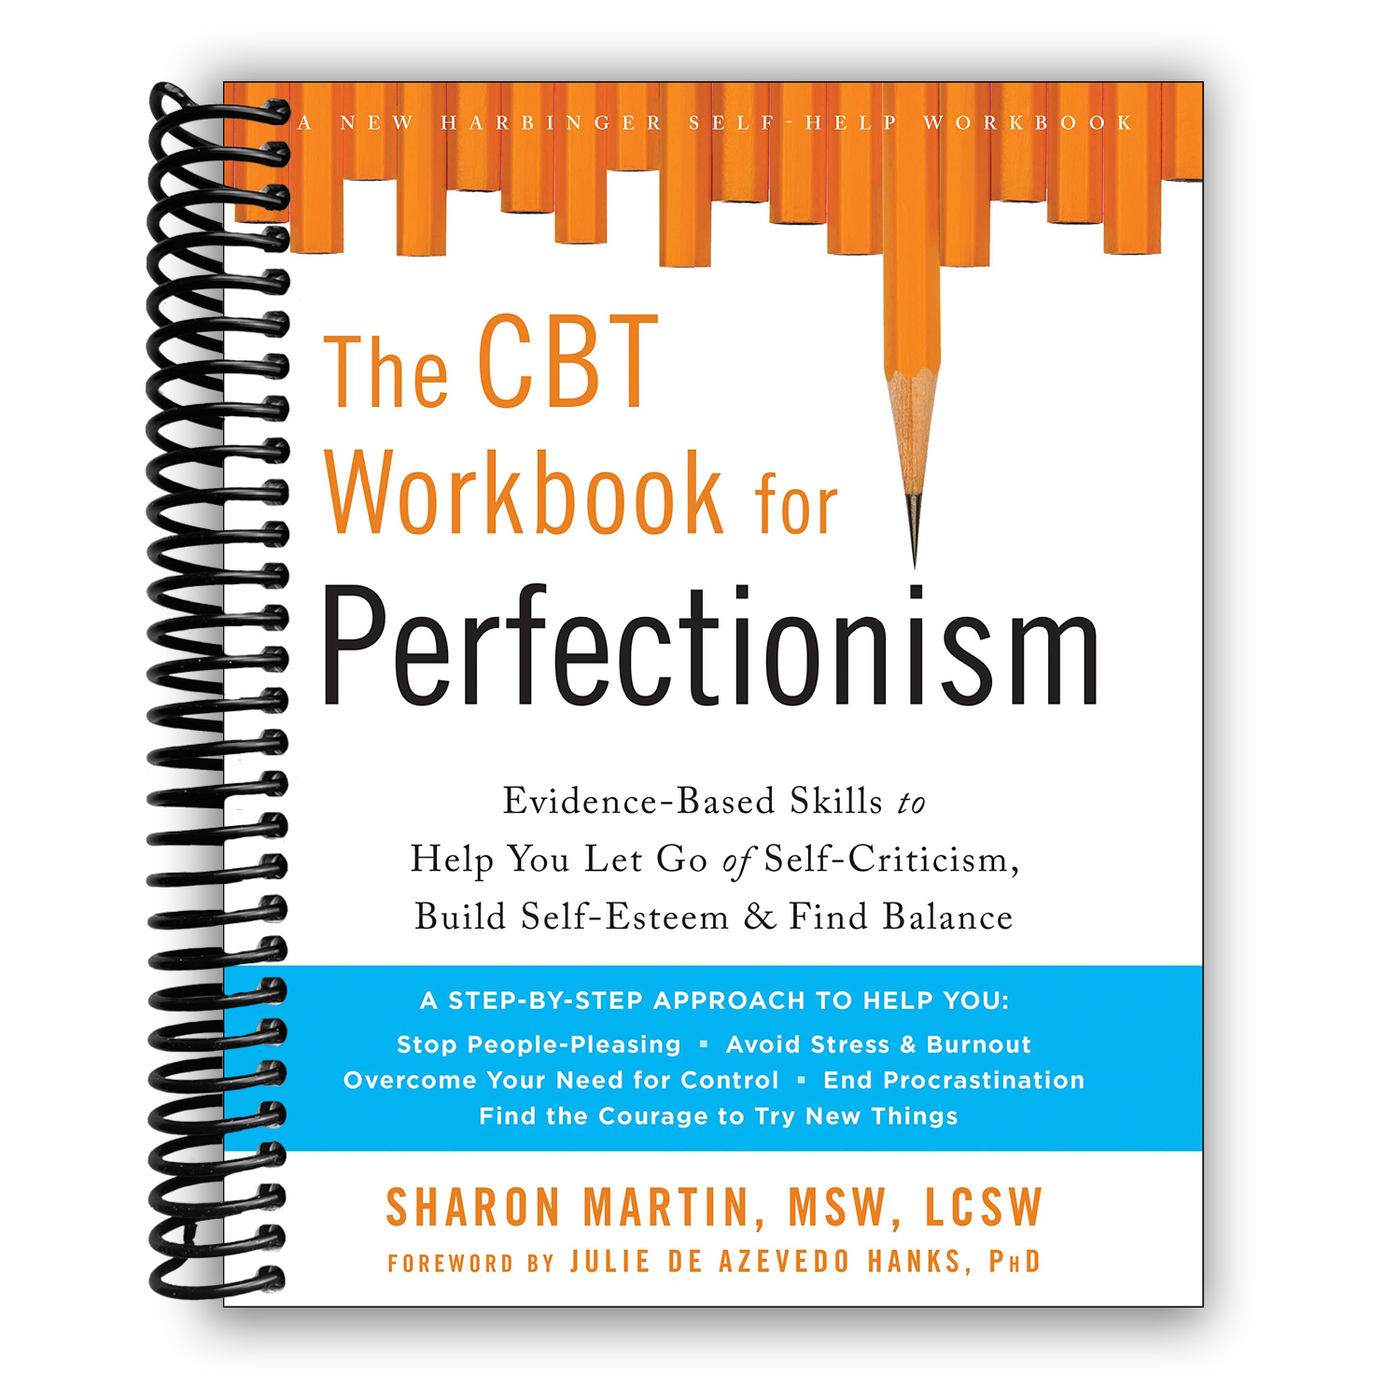 The CBT Workbook for Perfectionism: Evidence-Based Skills to Help You Let Go of Self-Criticism, Build Self-Esteem, and Find Balance(Spiral Bound)